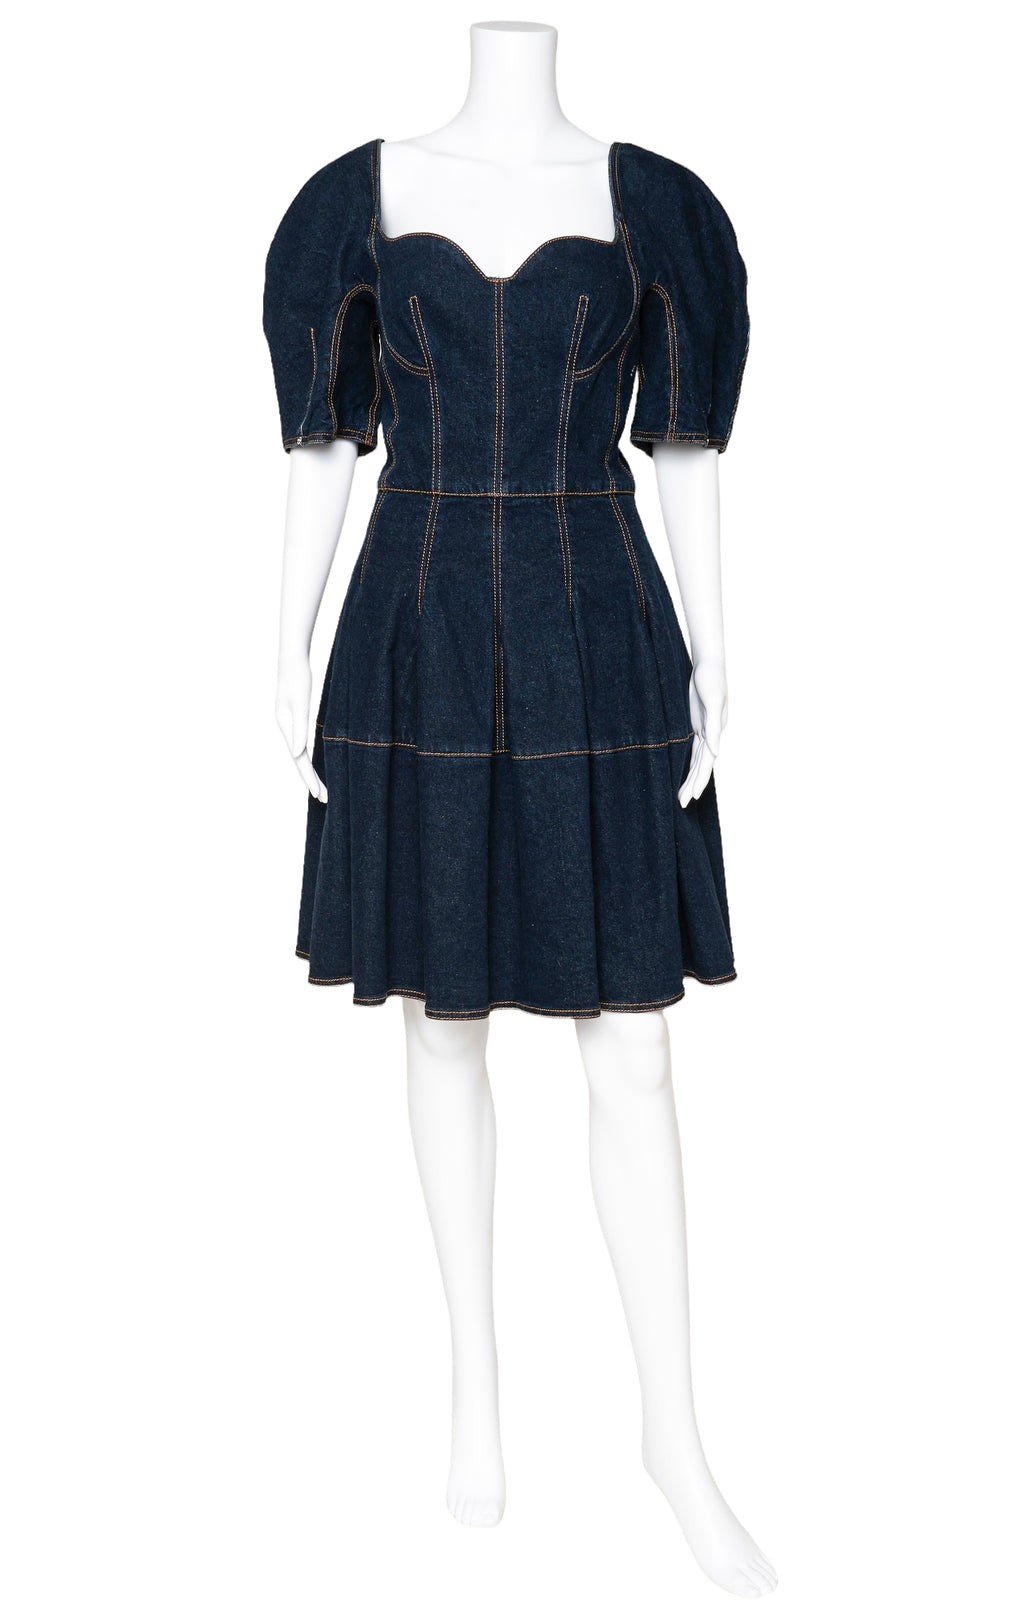 ALEXANDER MCQUEEN (NEW) with tags Dress Size: IT 46 / Comparable to US 8-10